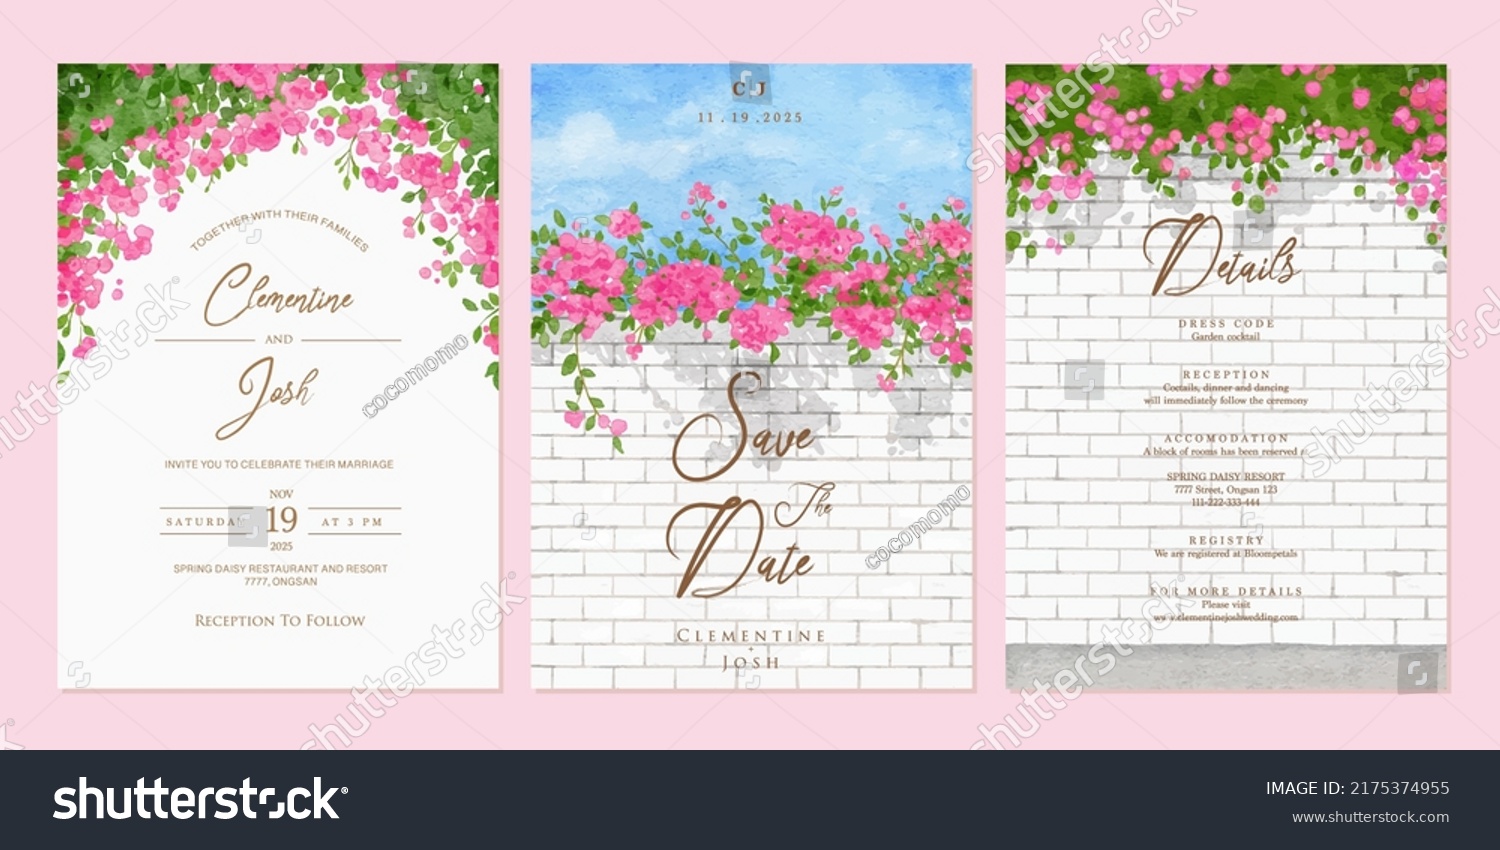 SVG of Set of wedding invitation template with watercolor pink bougainvillea flower brick wall landscape svg